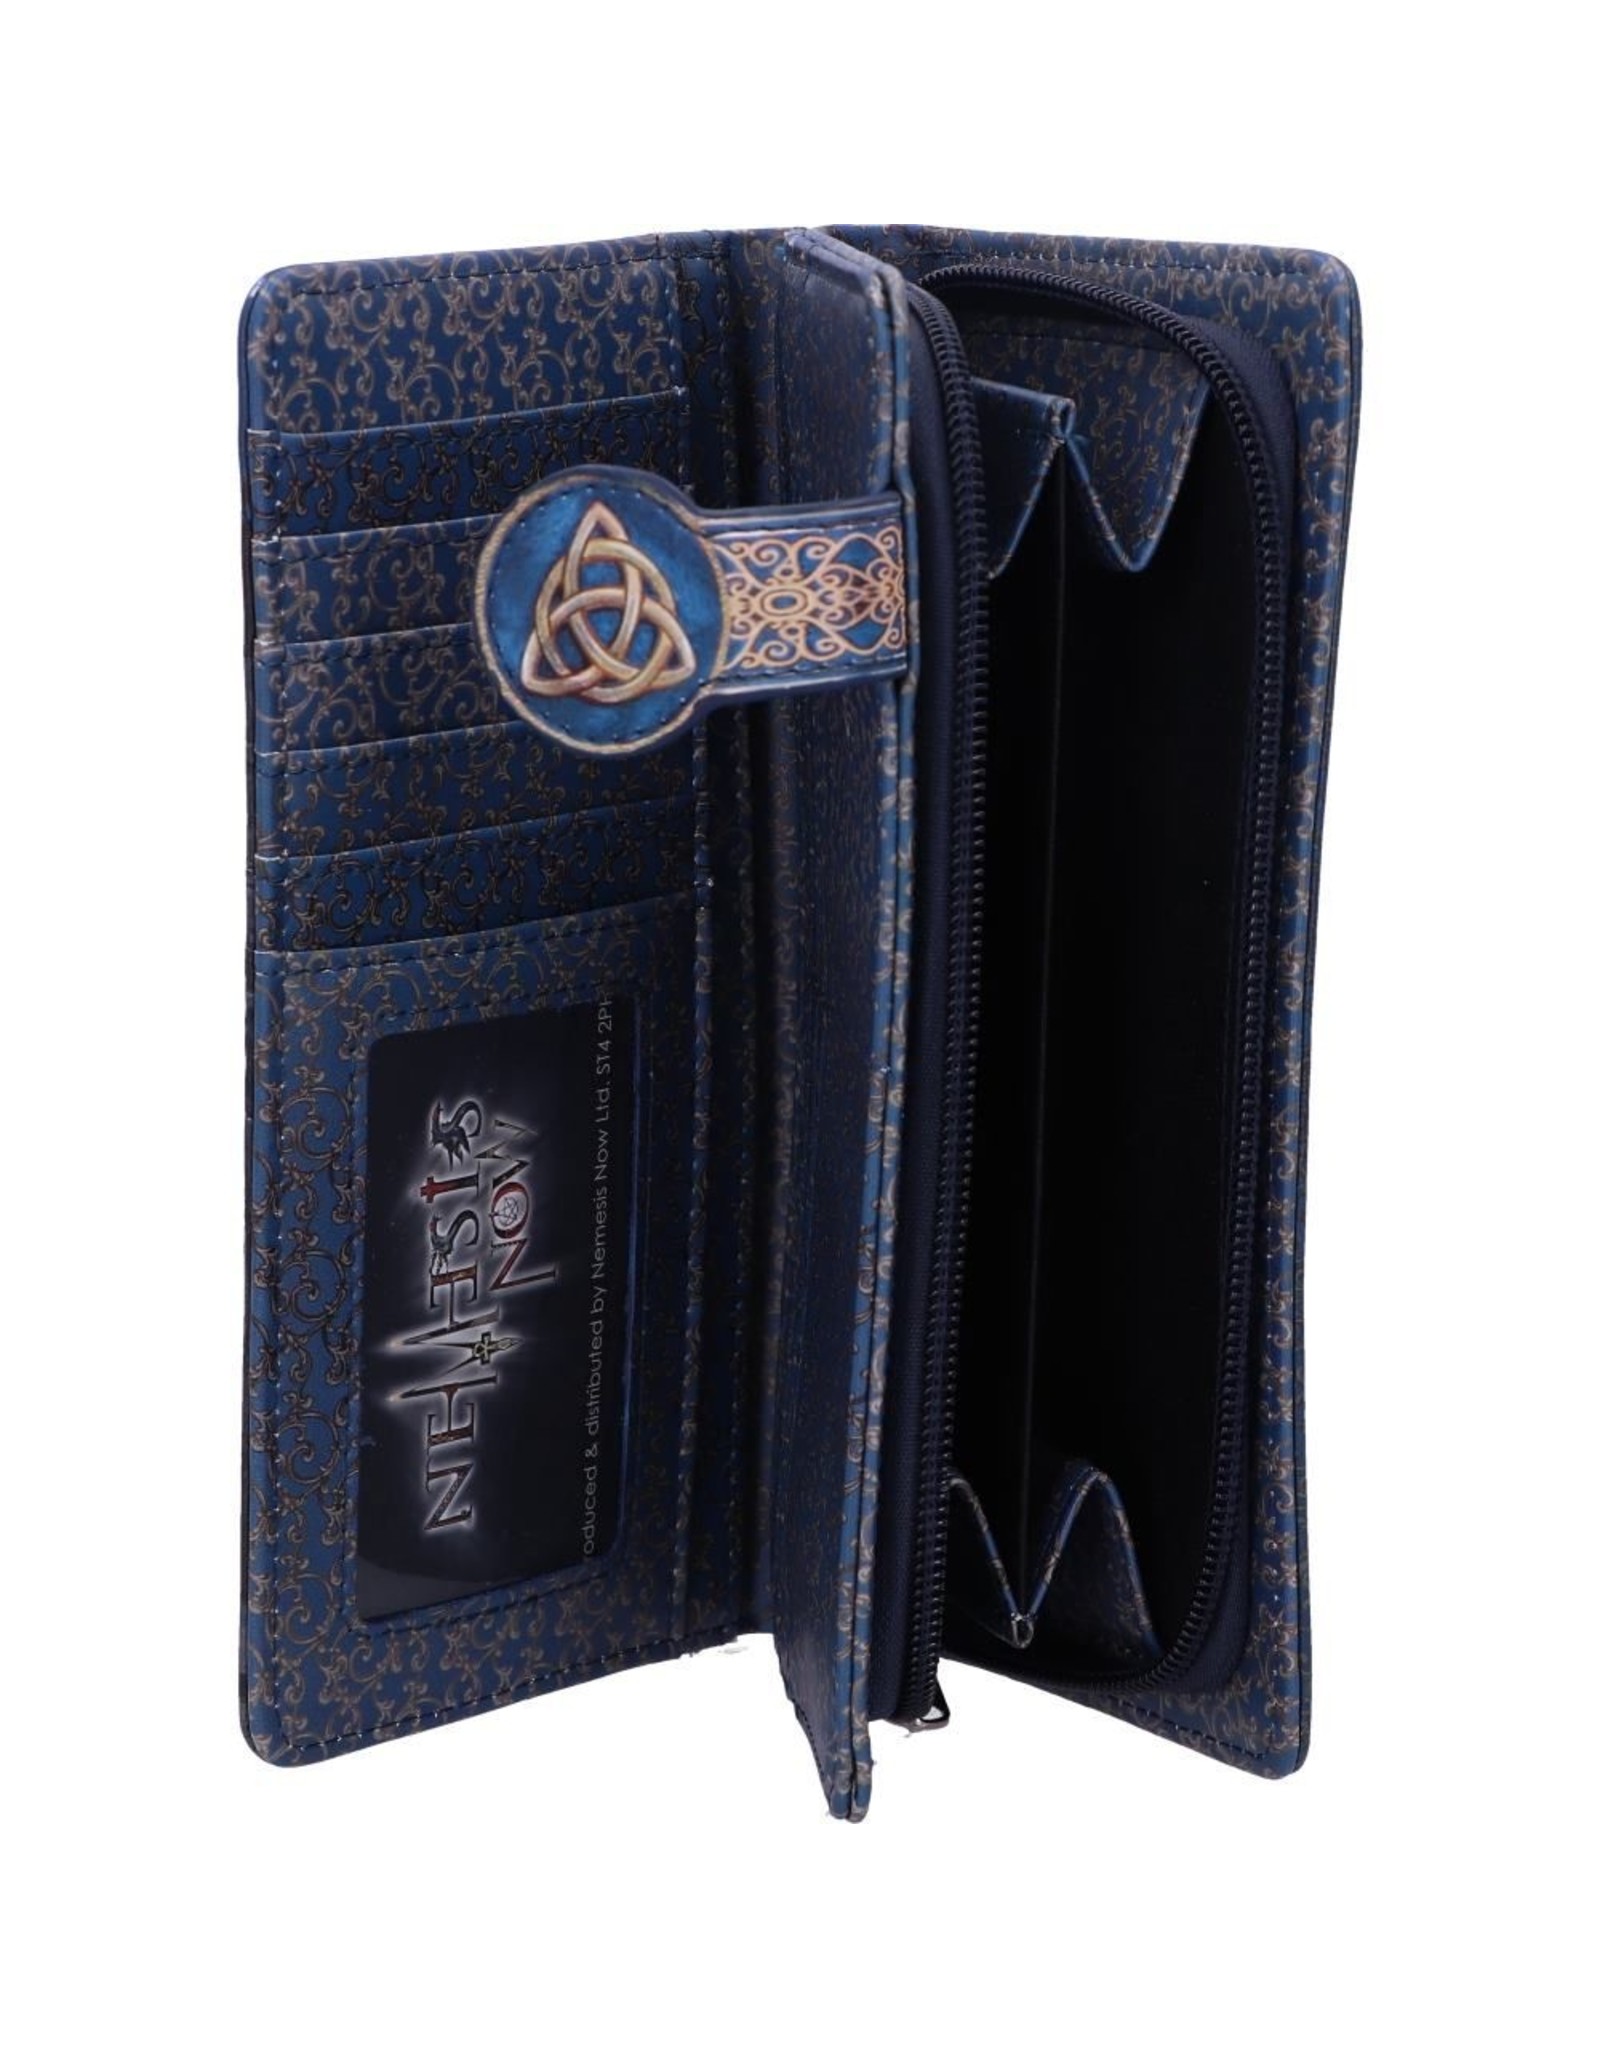 Nemesis Now Fantasy wallets and purses - A Brush With Magick Embossed Purse Lisa Parker